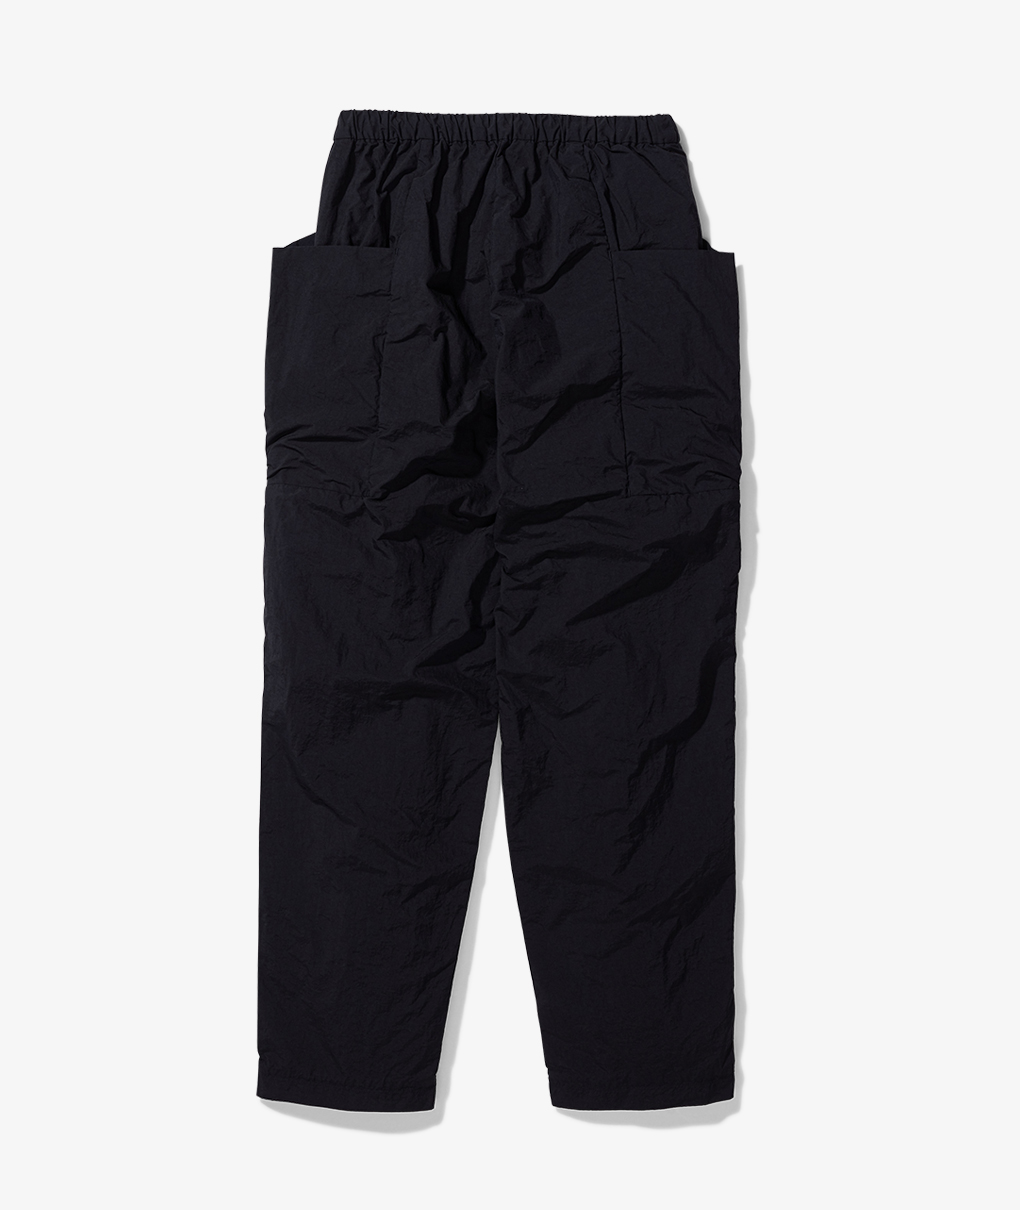 Norse Store | Shipping Worldwide - Trousers - TEÄTORA - Packable